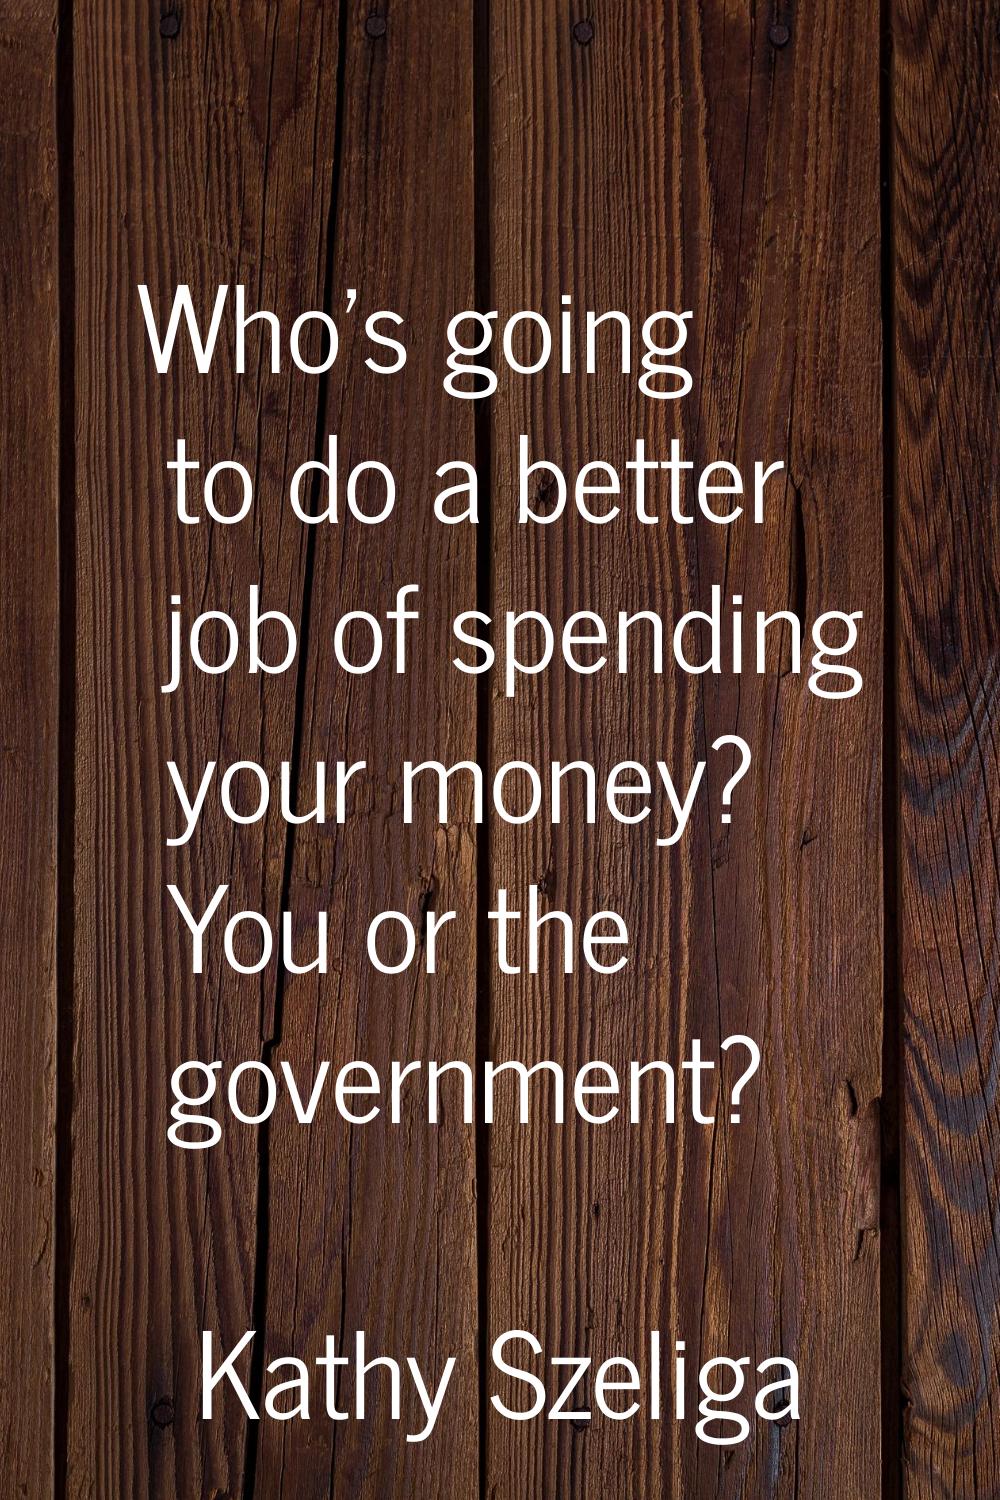 Who's going to do a better job of spending your money? You or the government?